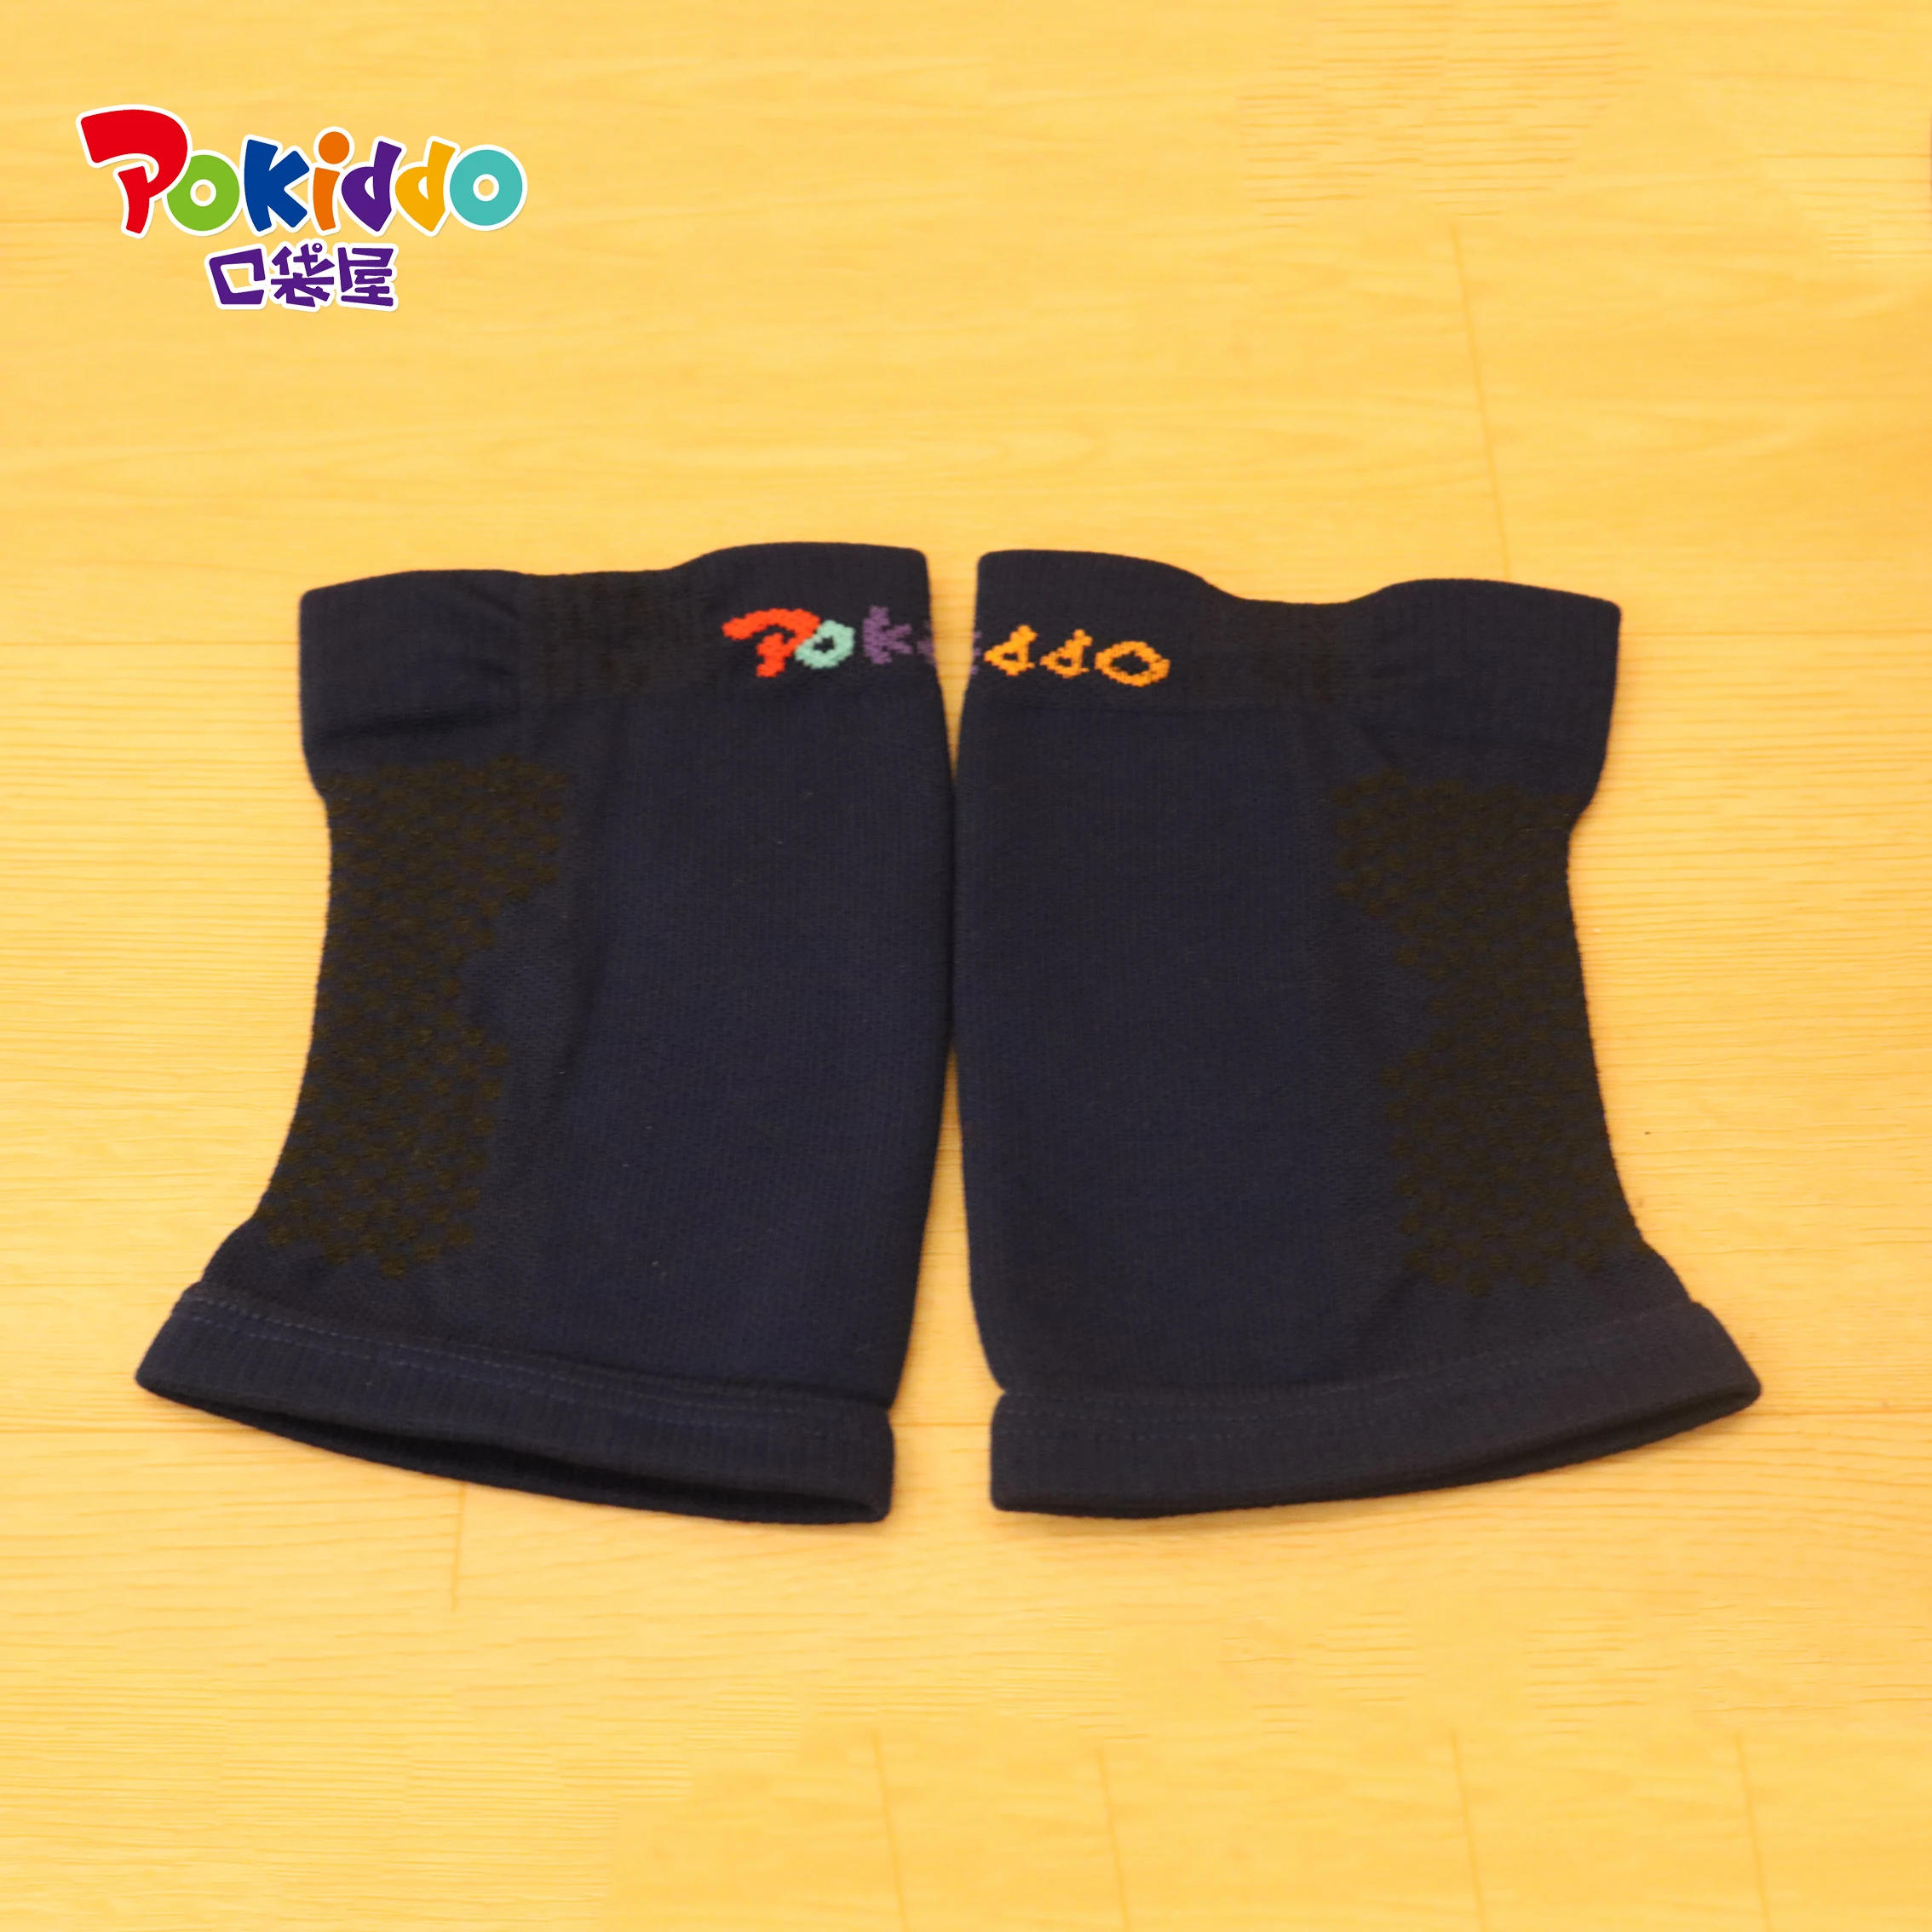 Pokiddo Safety Soft For Sports Kids Knee Protectors Cotton Elbow Knee Guard Elbow Knee Pads